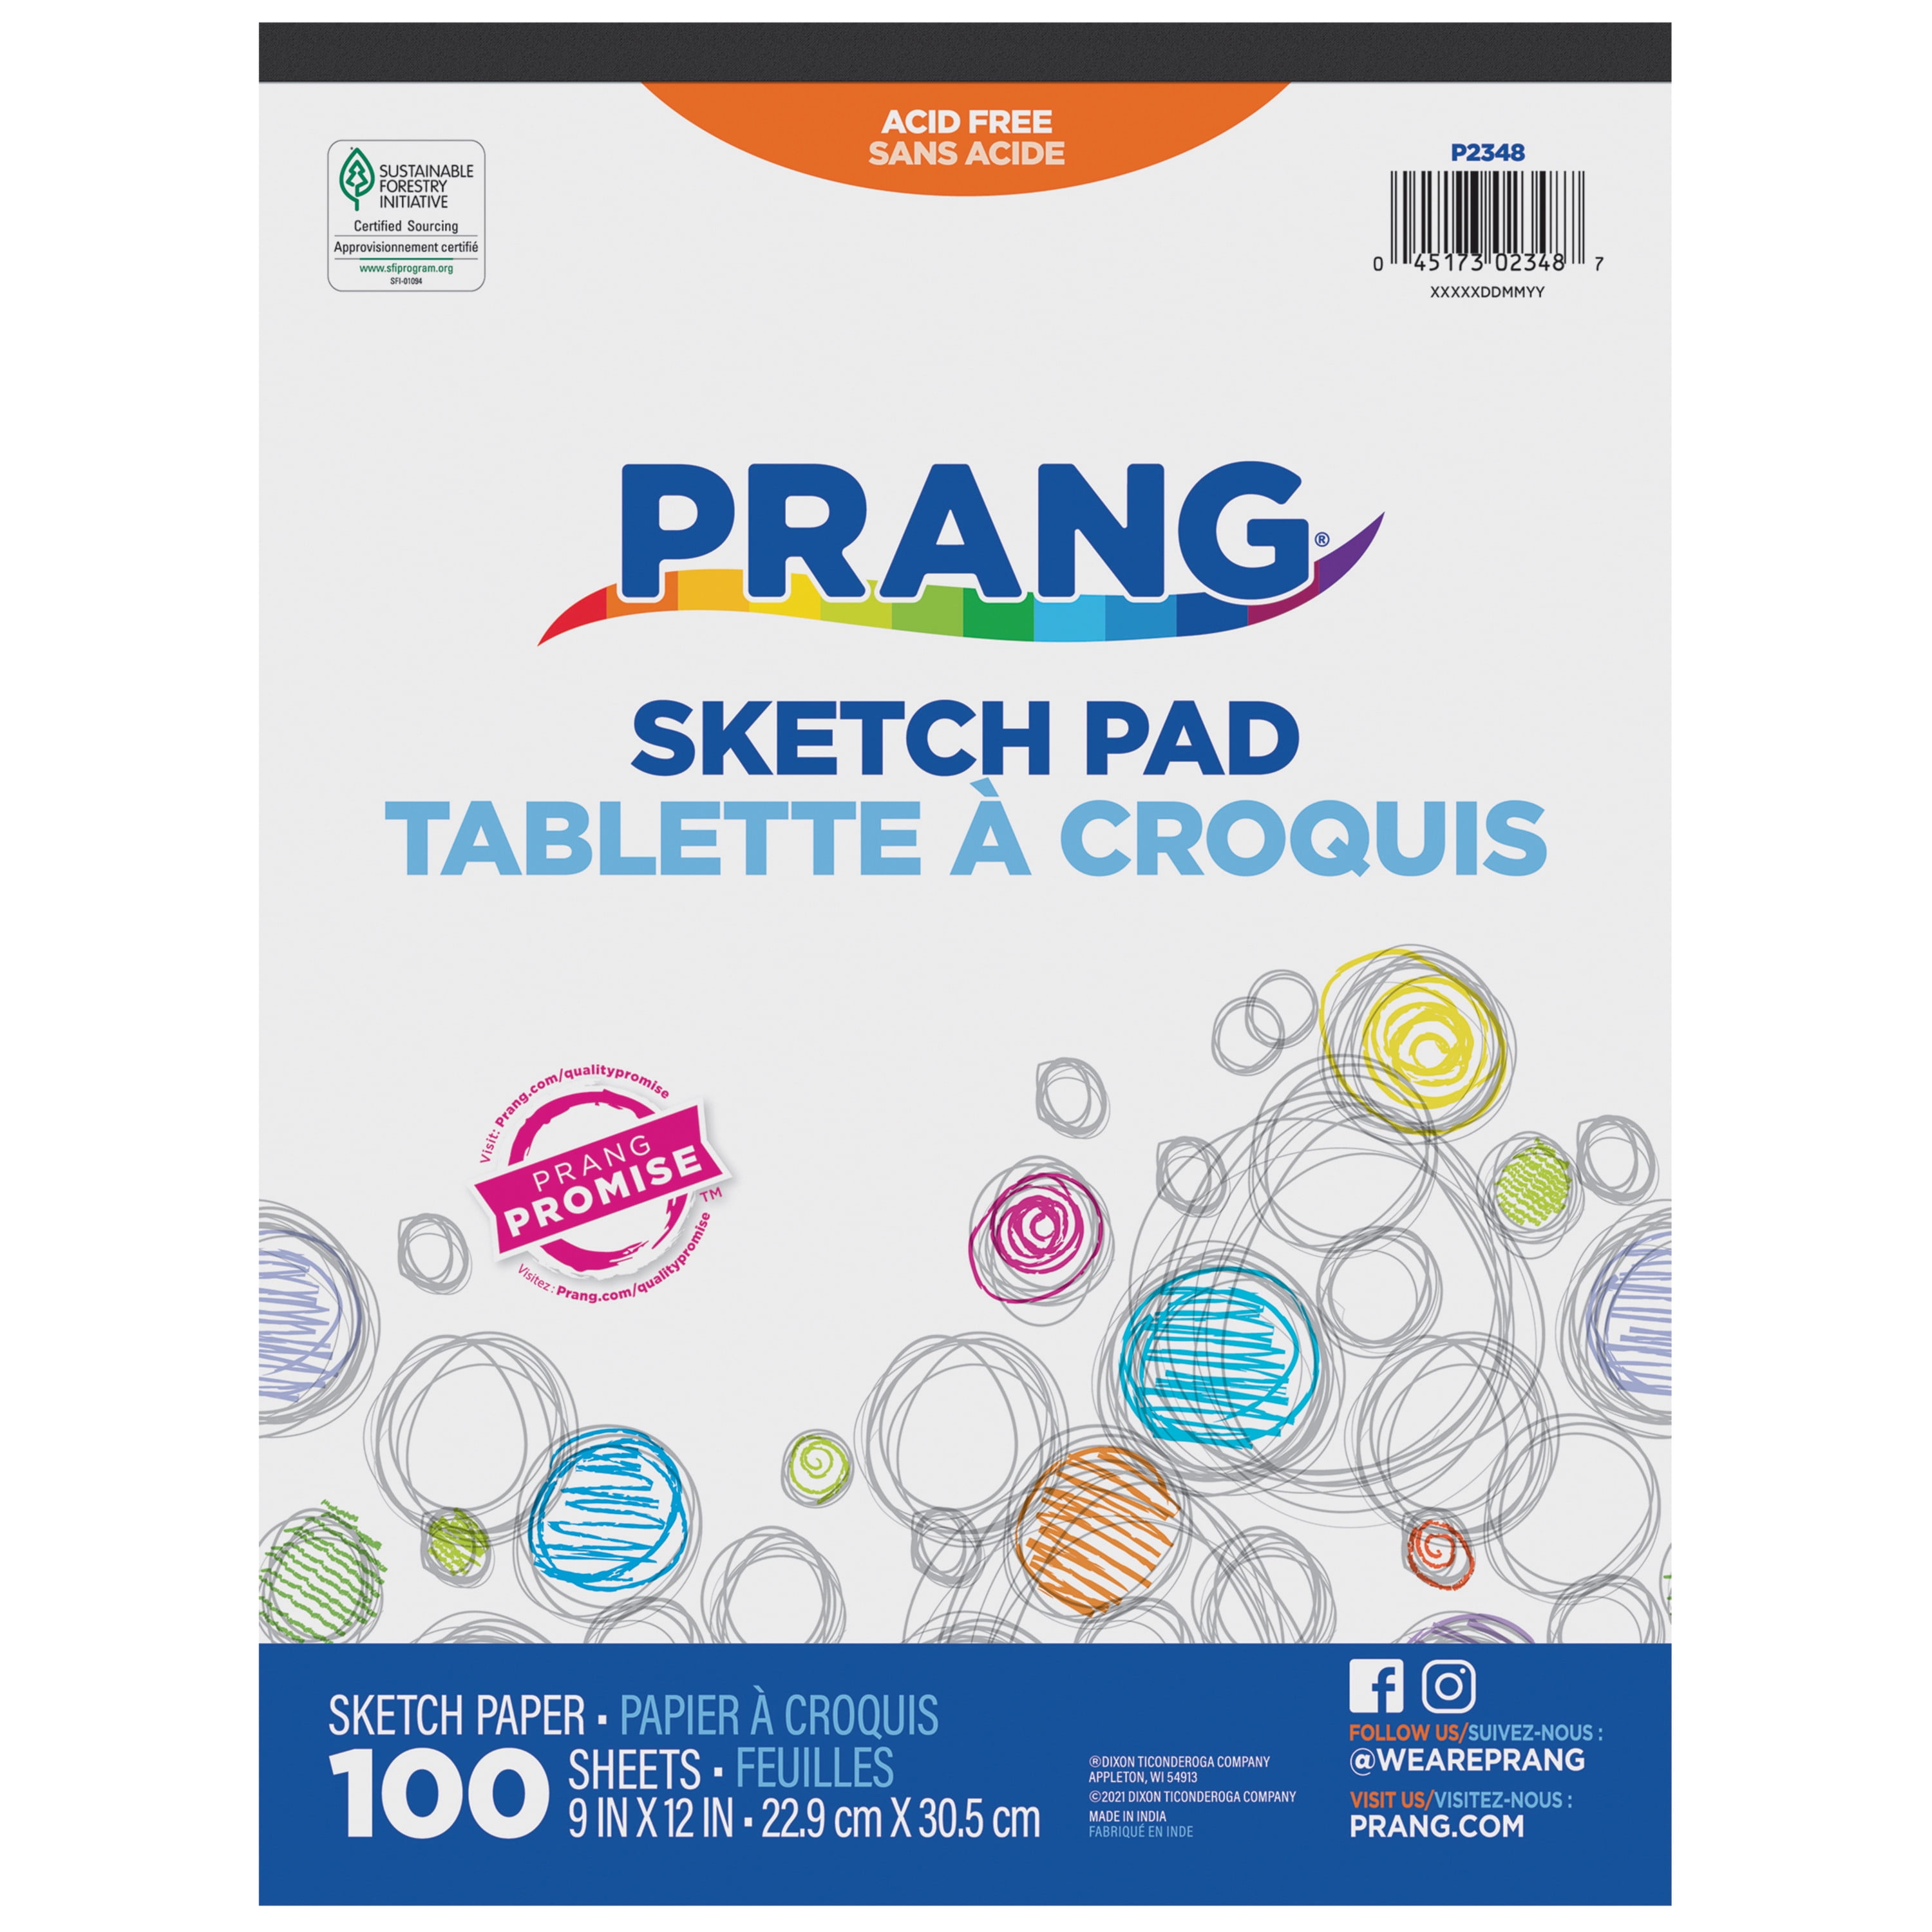 Marker Paper - 9 x 12 inch Marker Paper Sketchbook, 50 Sheets Per Pad,  White Acid-Free, 75 GSM Paper, Lightweight and Sketching and Drawing Pages